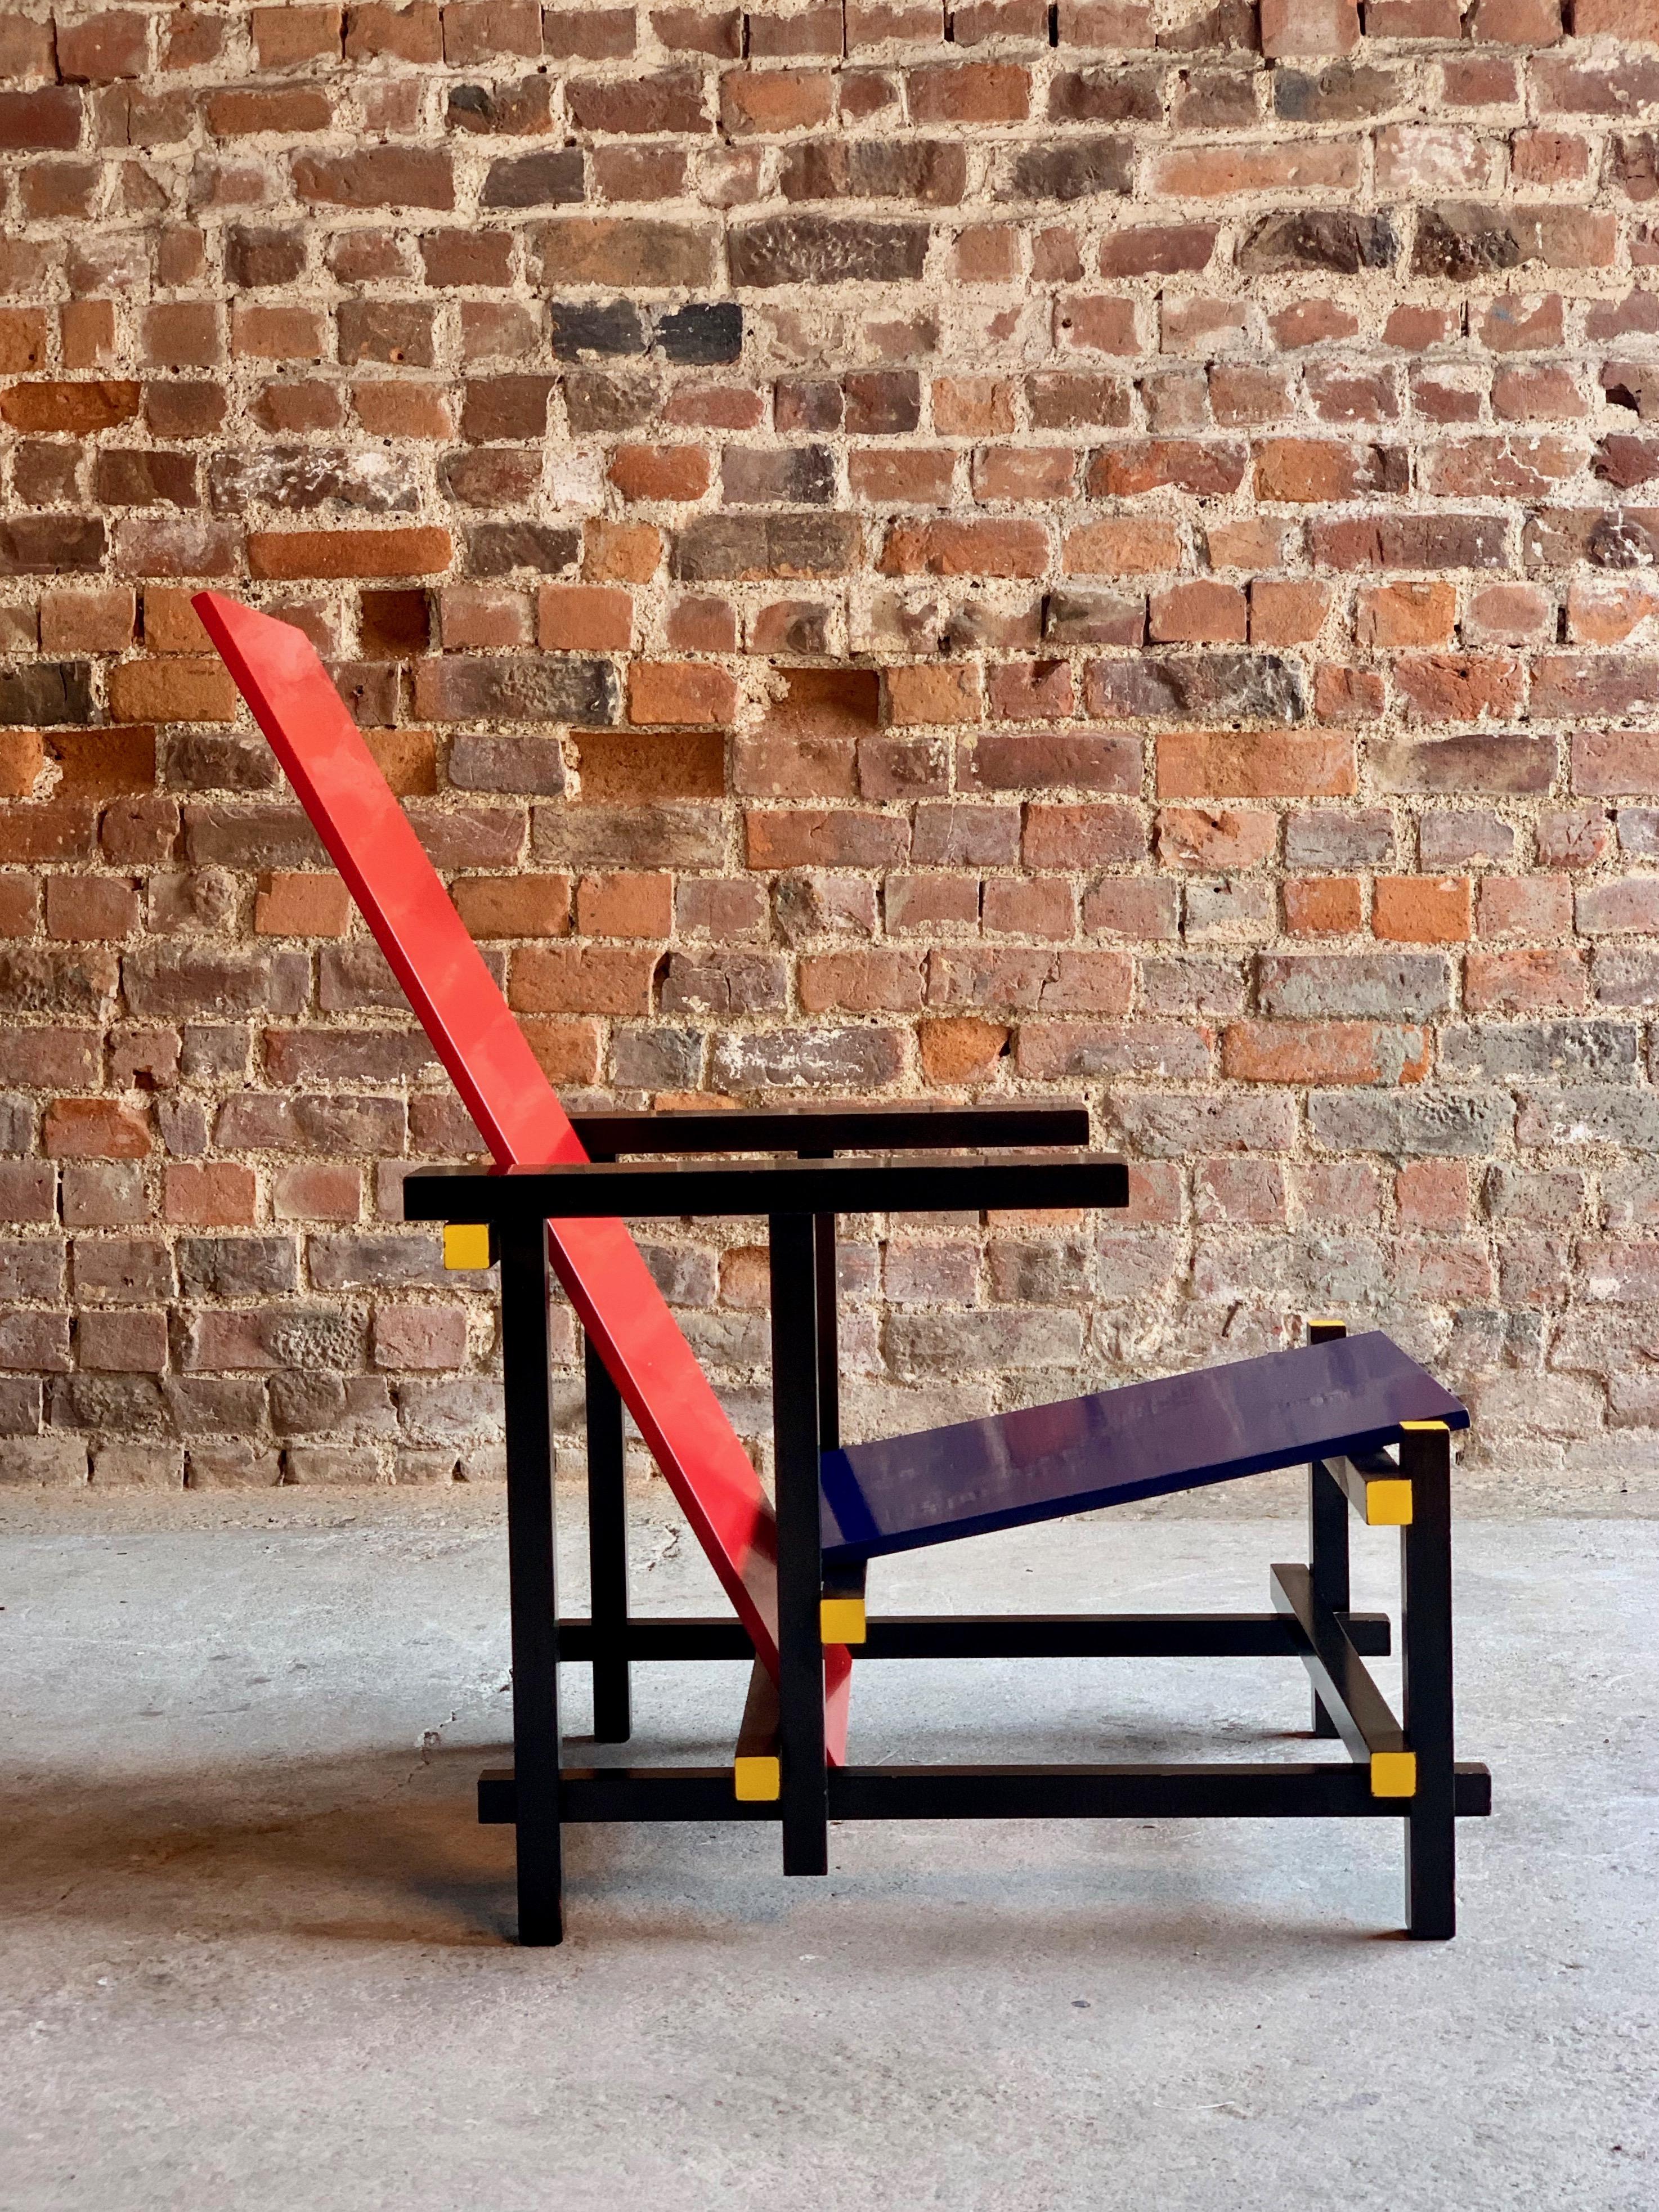 Cassina red and blue chair by Gerrit T Rietveld numbered 8488, Italy, circa 1970

?Cassina red and blue chair originally designed by Gerrit Rietveld, numbered 8488 and with makers marks to the underside, The Red and Blue armchair is an iconic